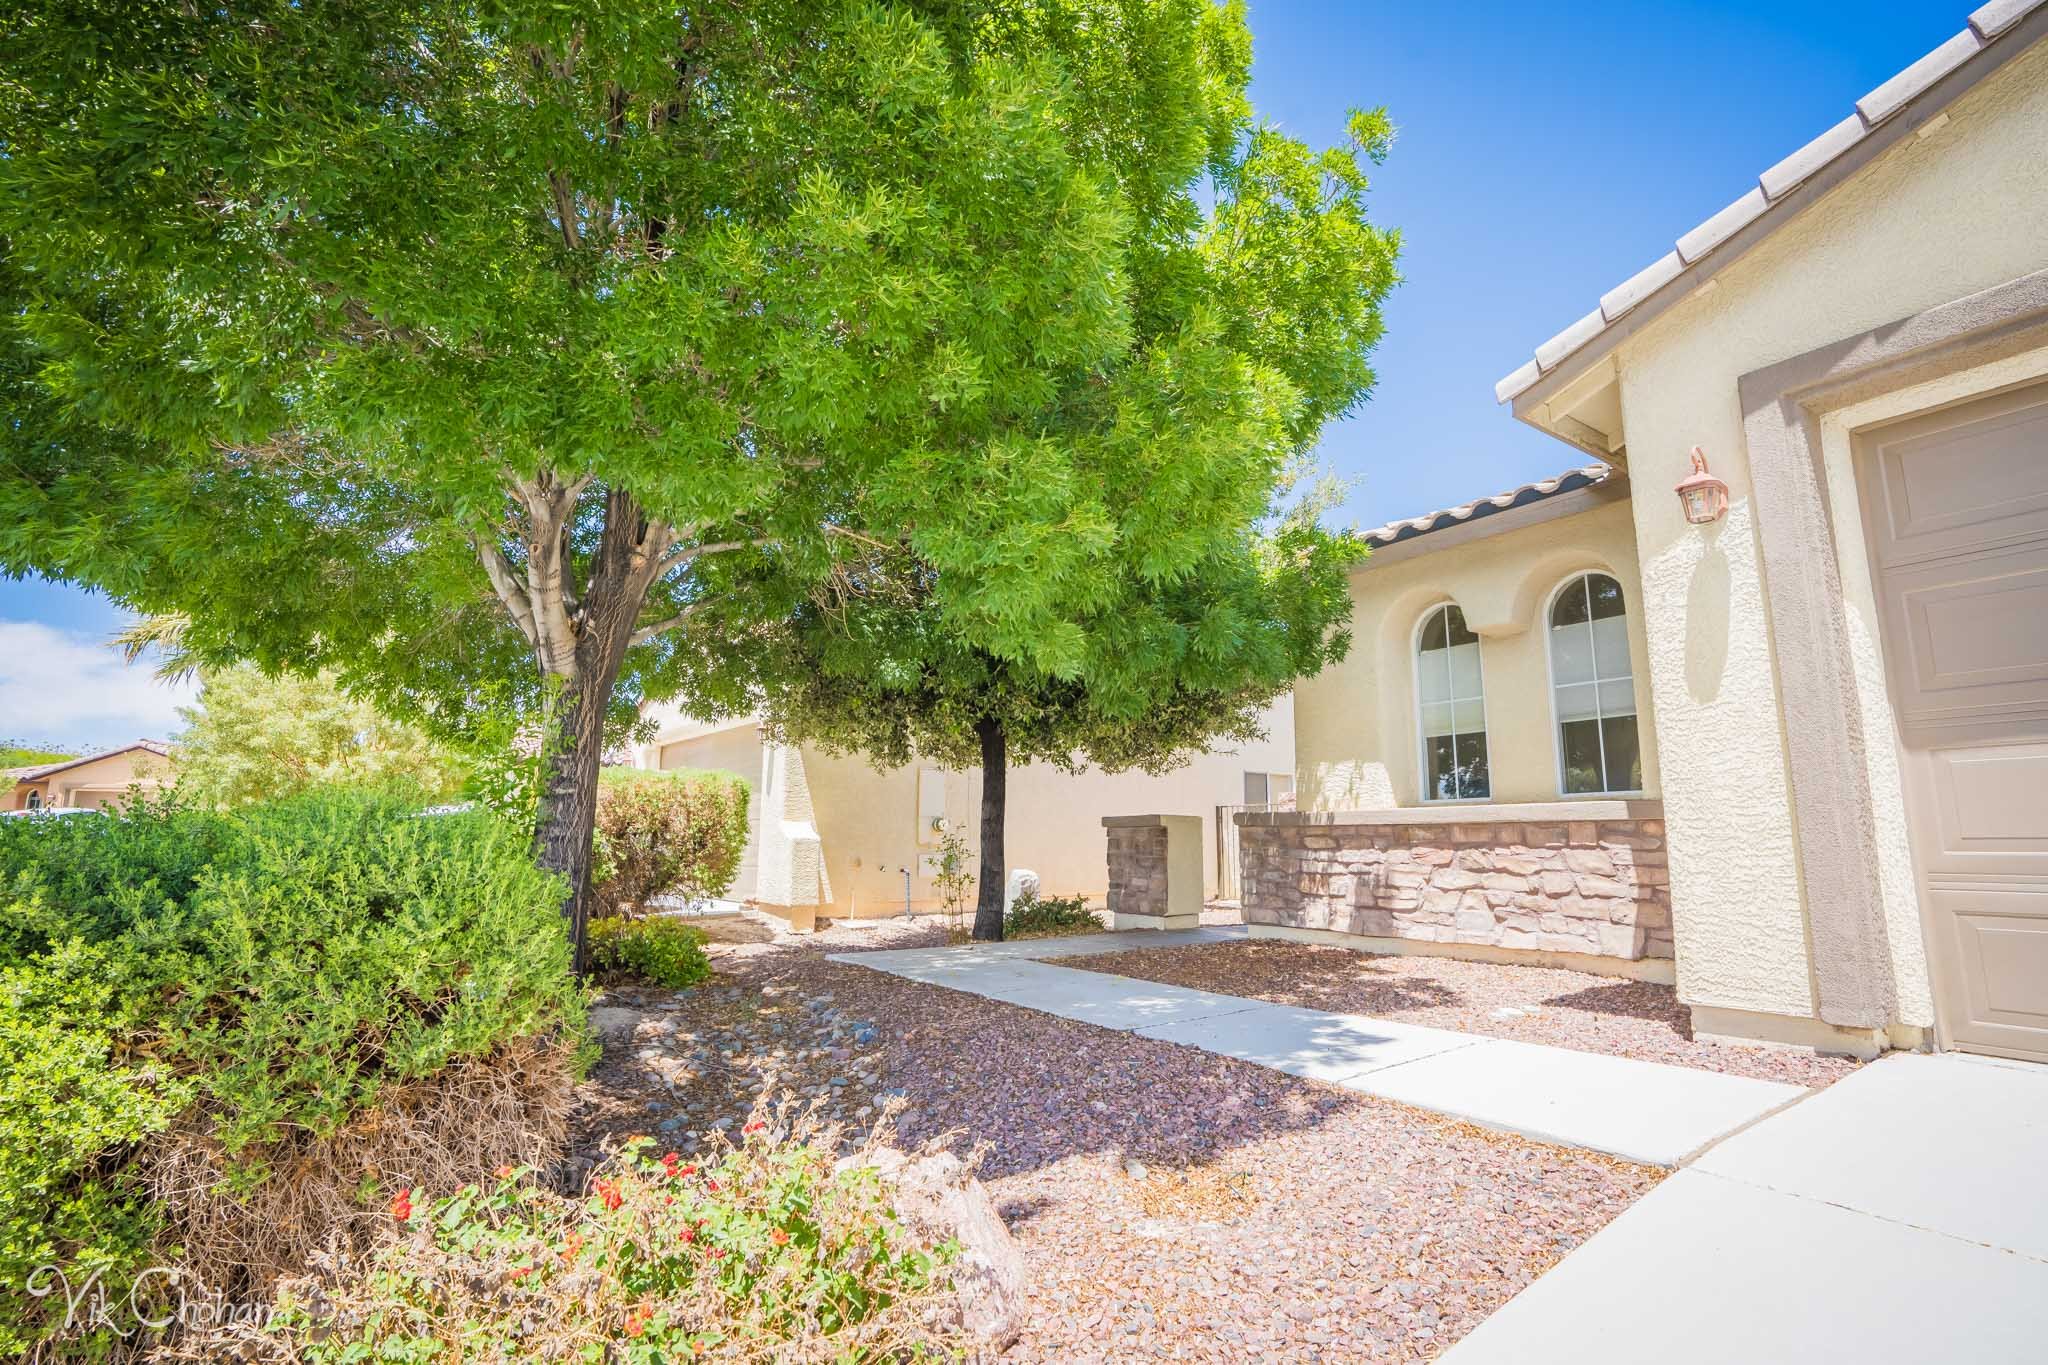 2022-05-15-5378-E-Cansano-St-Pahrump-Real-Estate-Photography-Virtual-Tour-Drone-Photography-Vik-Chohan-Photography-Photo-Booth-Social-Media-VCP-006.jpg